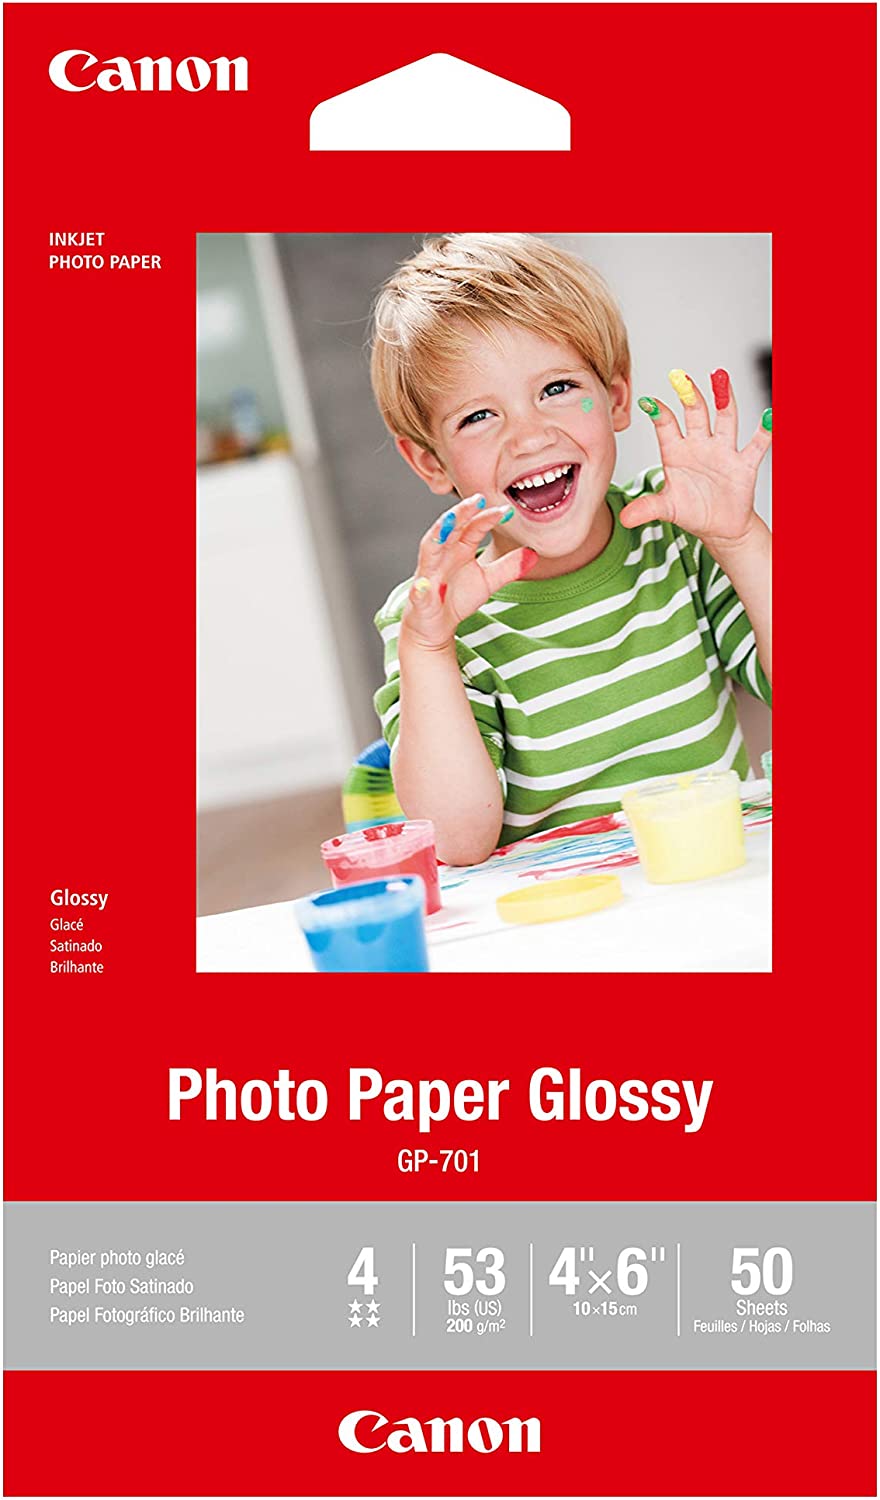 CanonInk Glossy Photo Paper 4"x 6" 50 Sheets (1433C002)